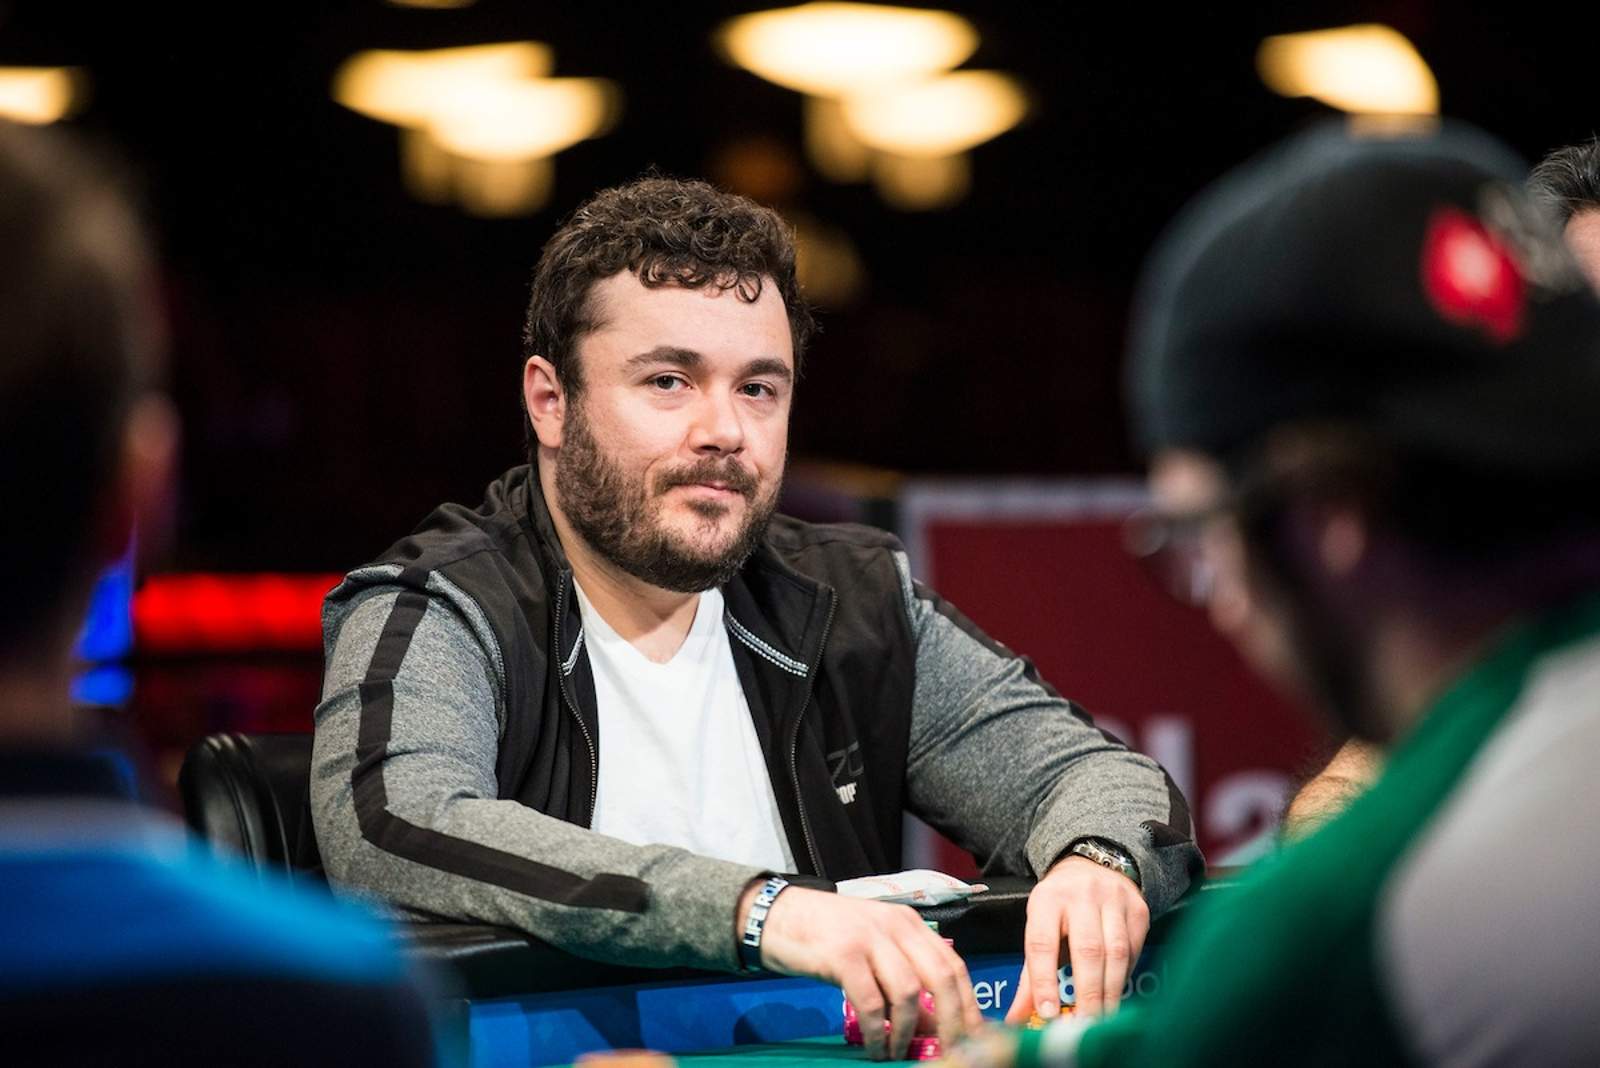 Omaha Week: Anthony Zinno's Favorite Game is Pot Limit Omaha HiLo